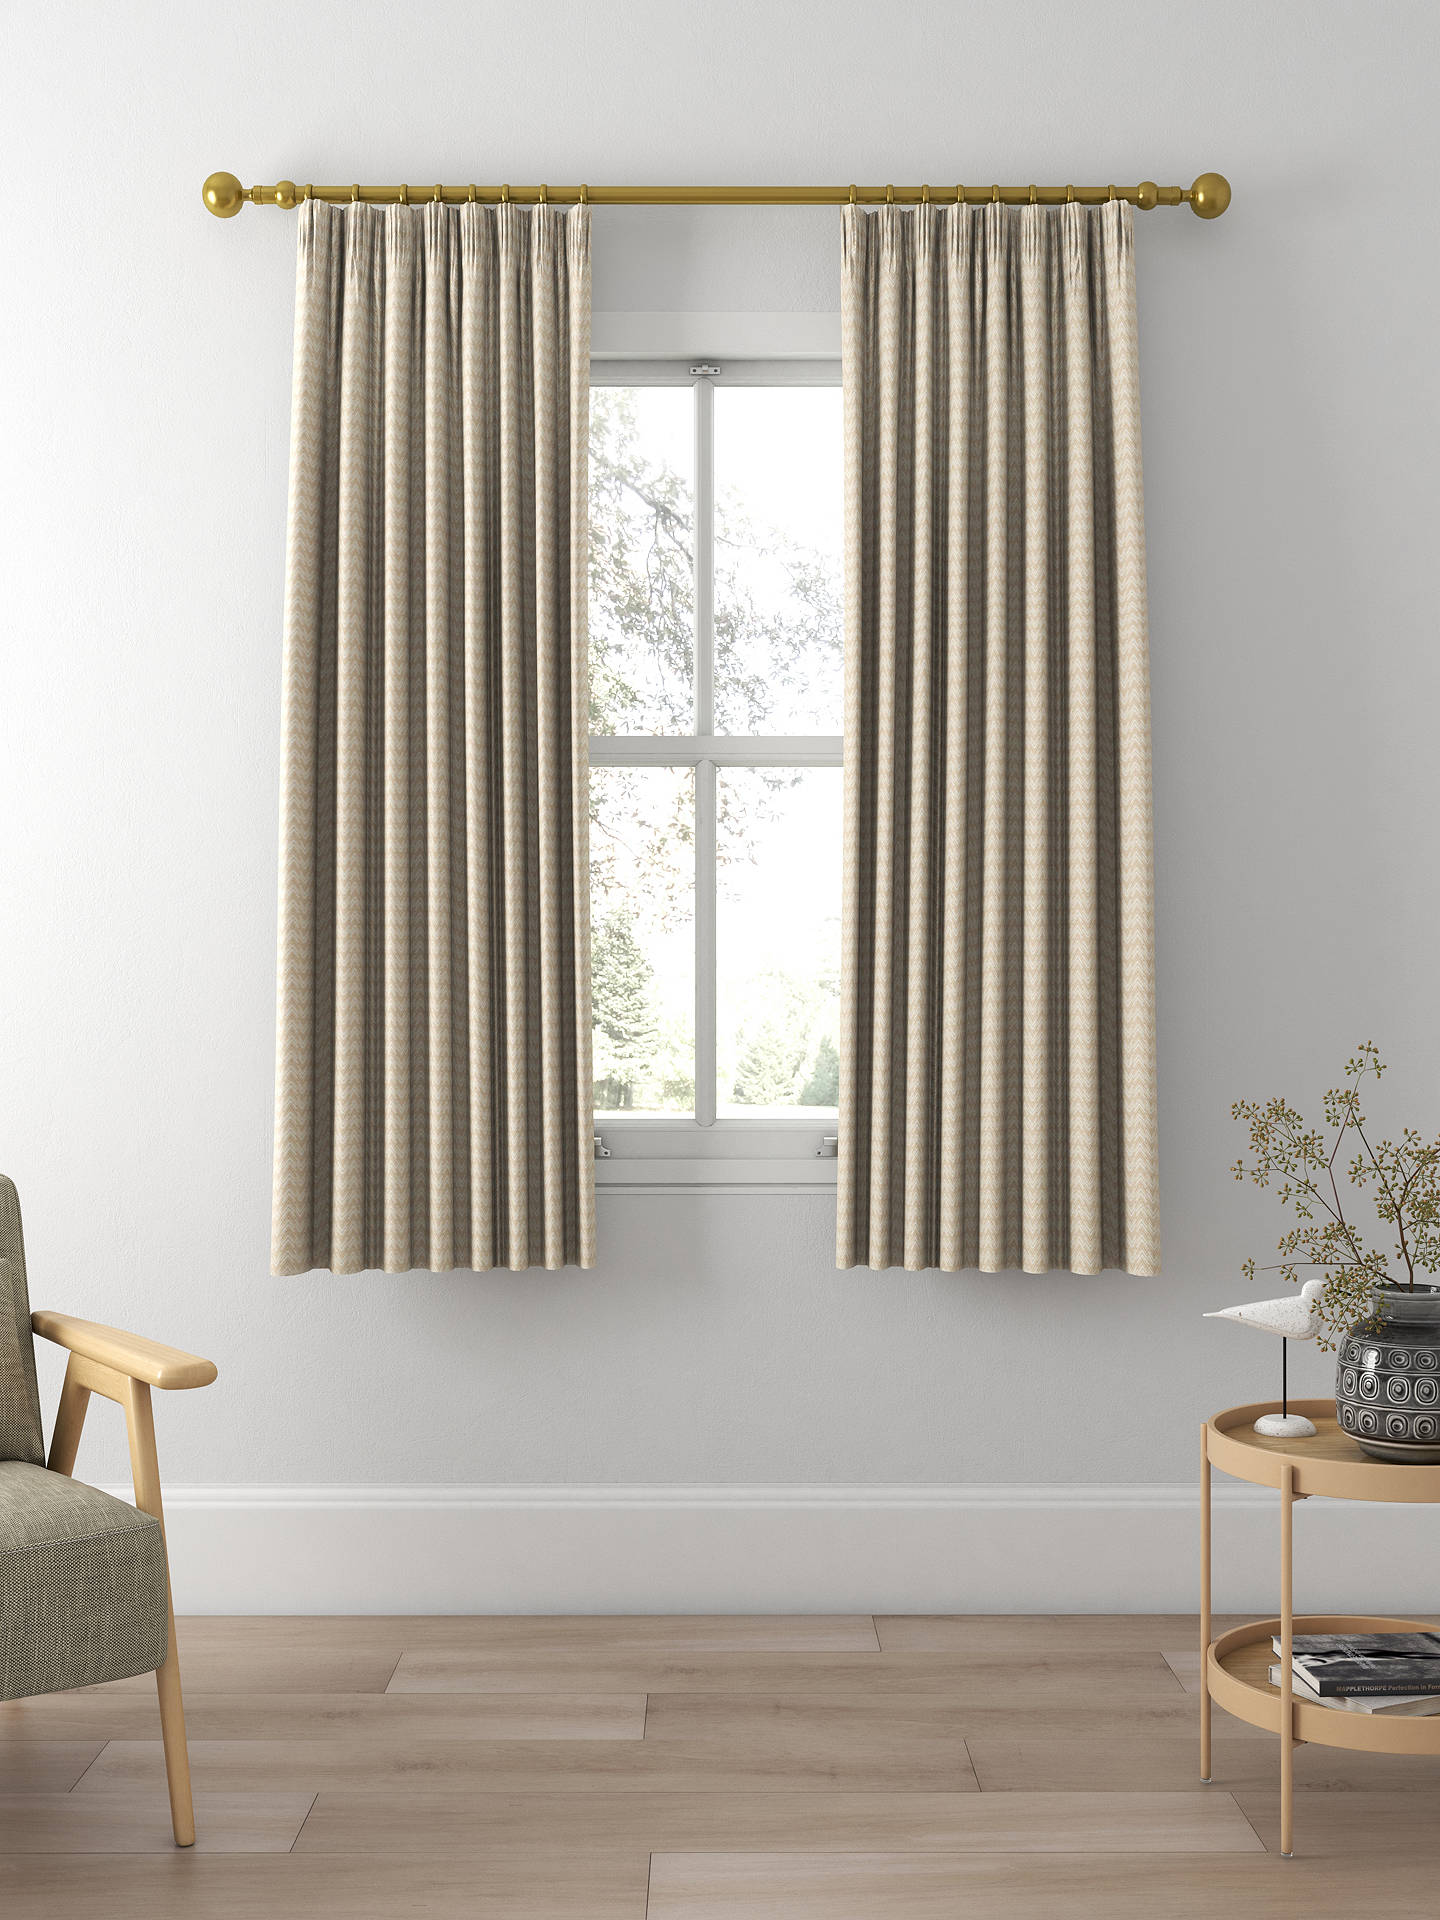 Sanderson Herring Made to Measure Curtains, Oyster